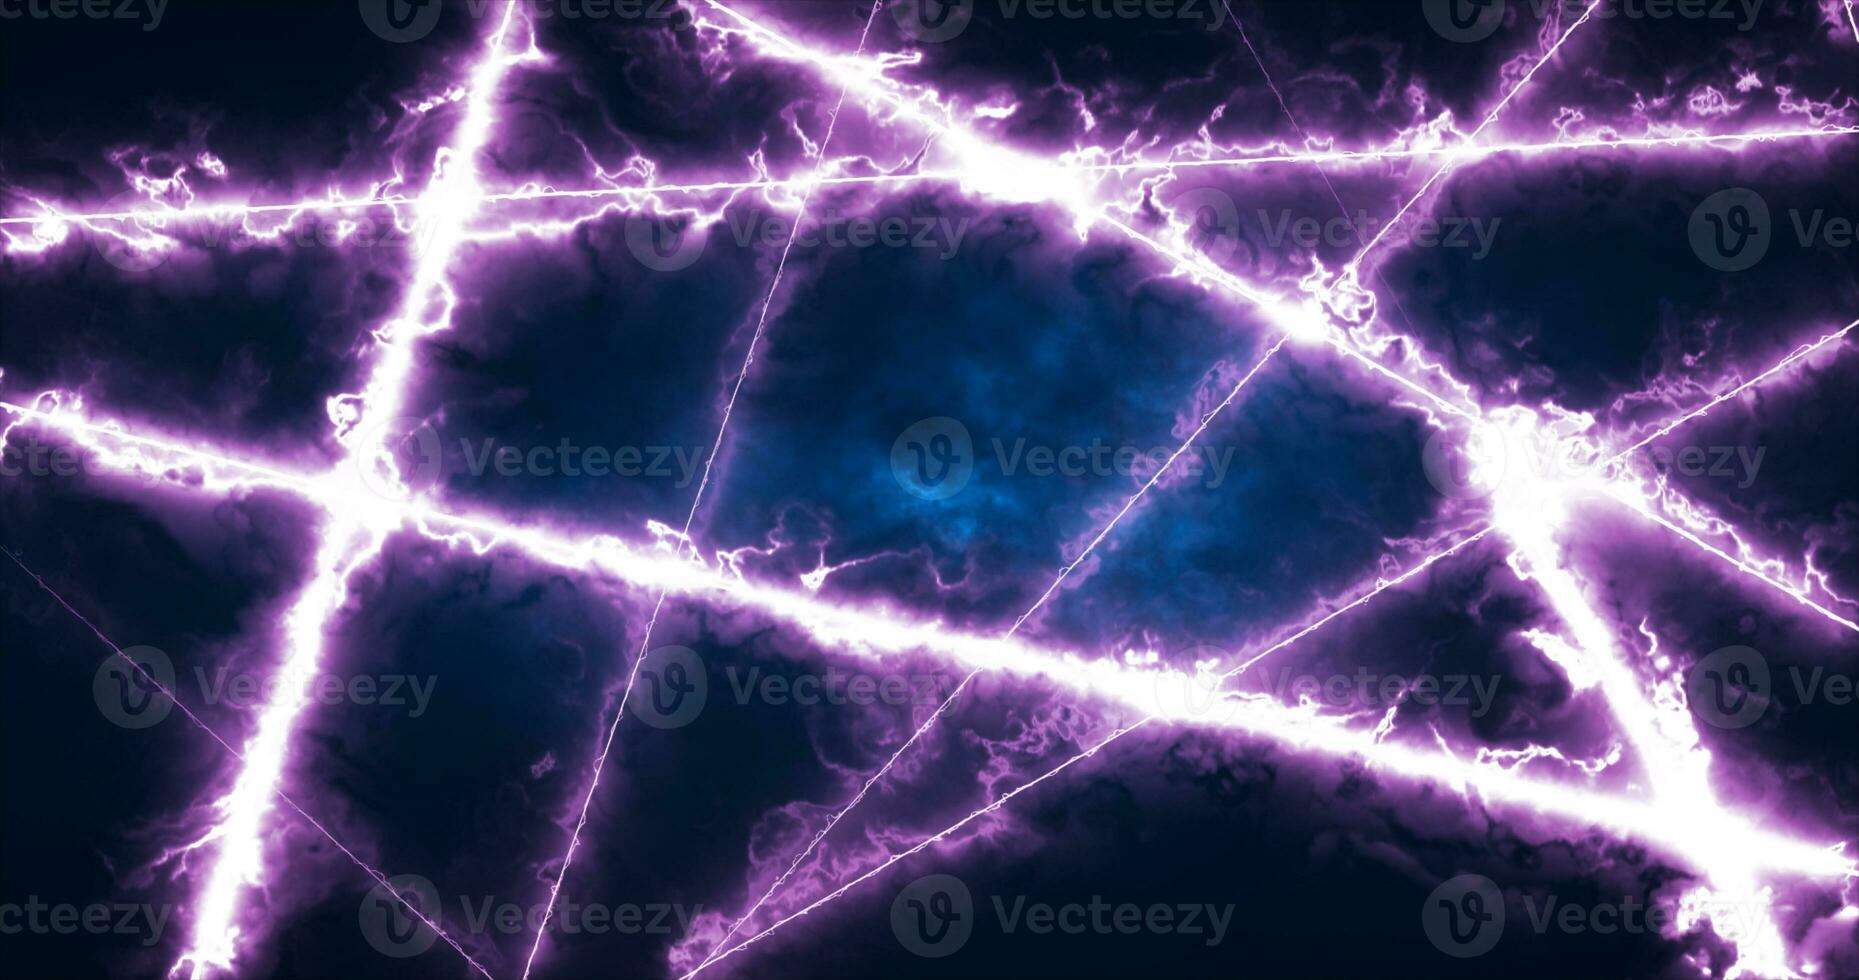 Abstract purple energy lines magical glowing background photo